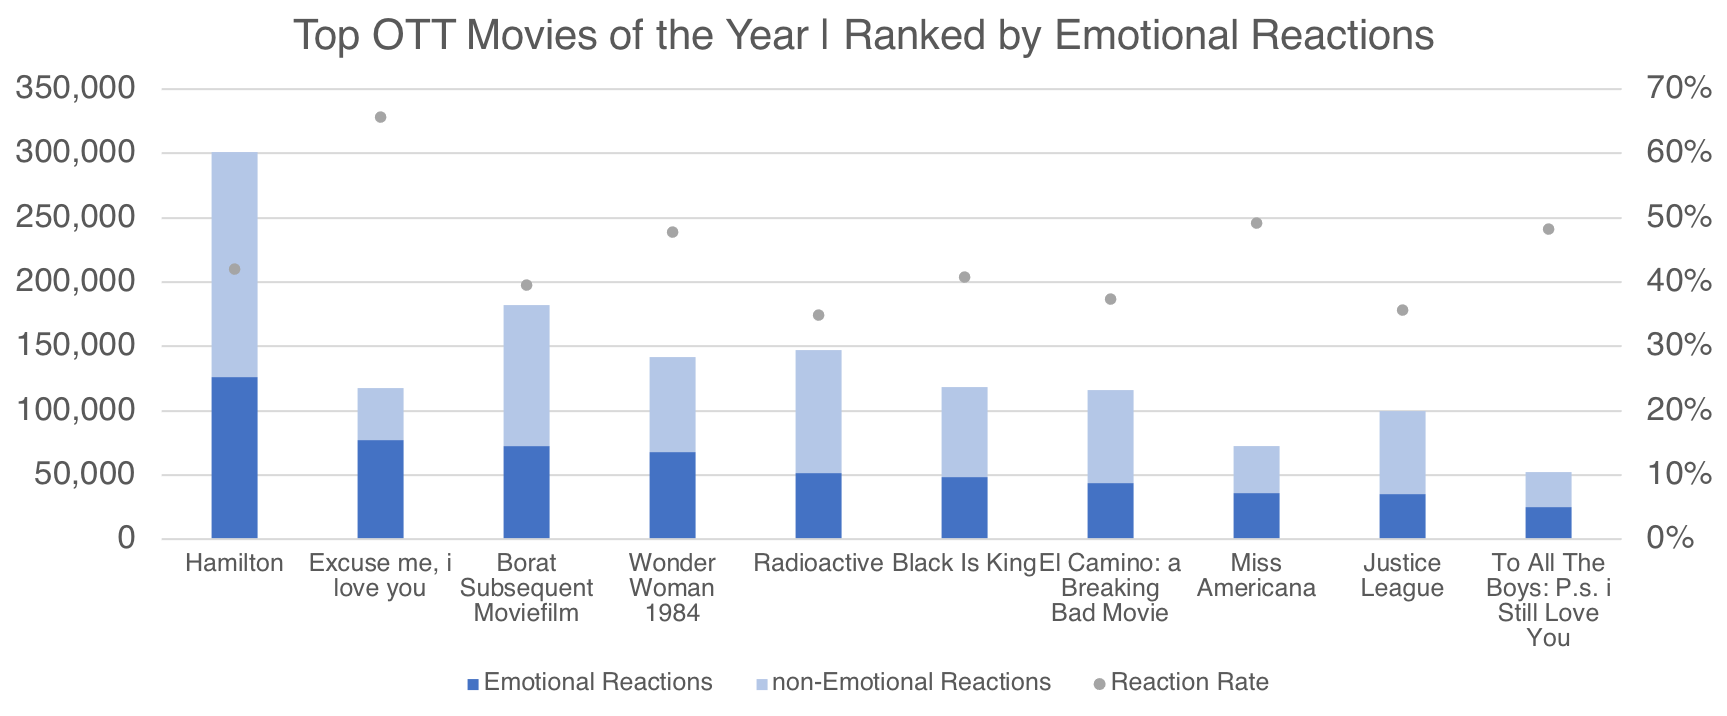 Source: Canvs Explore, Top OTT Movies in 2020, ranked by highest volume of Emotional Reactions